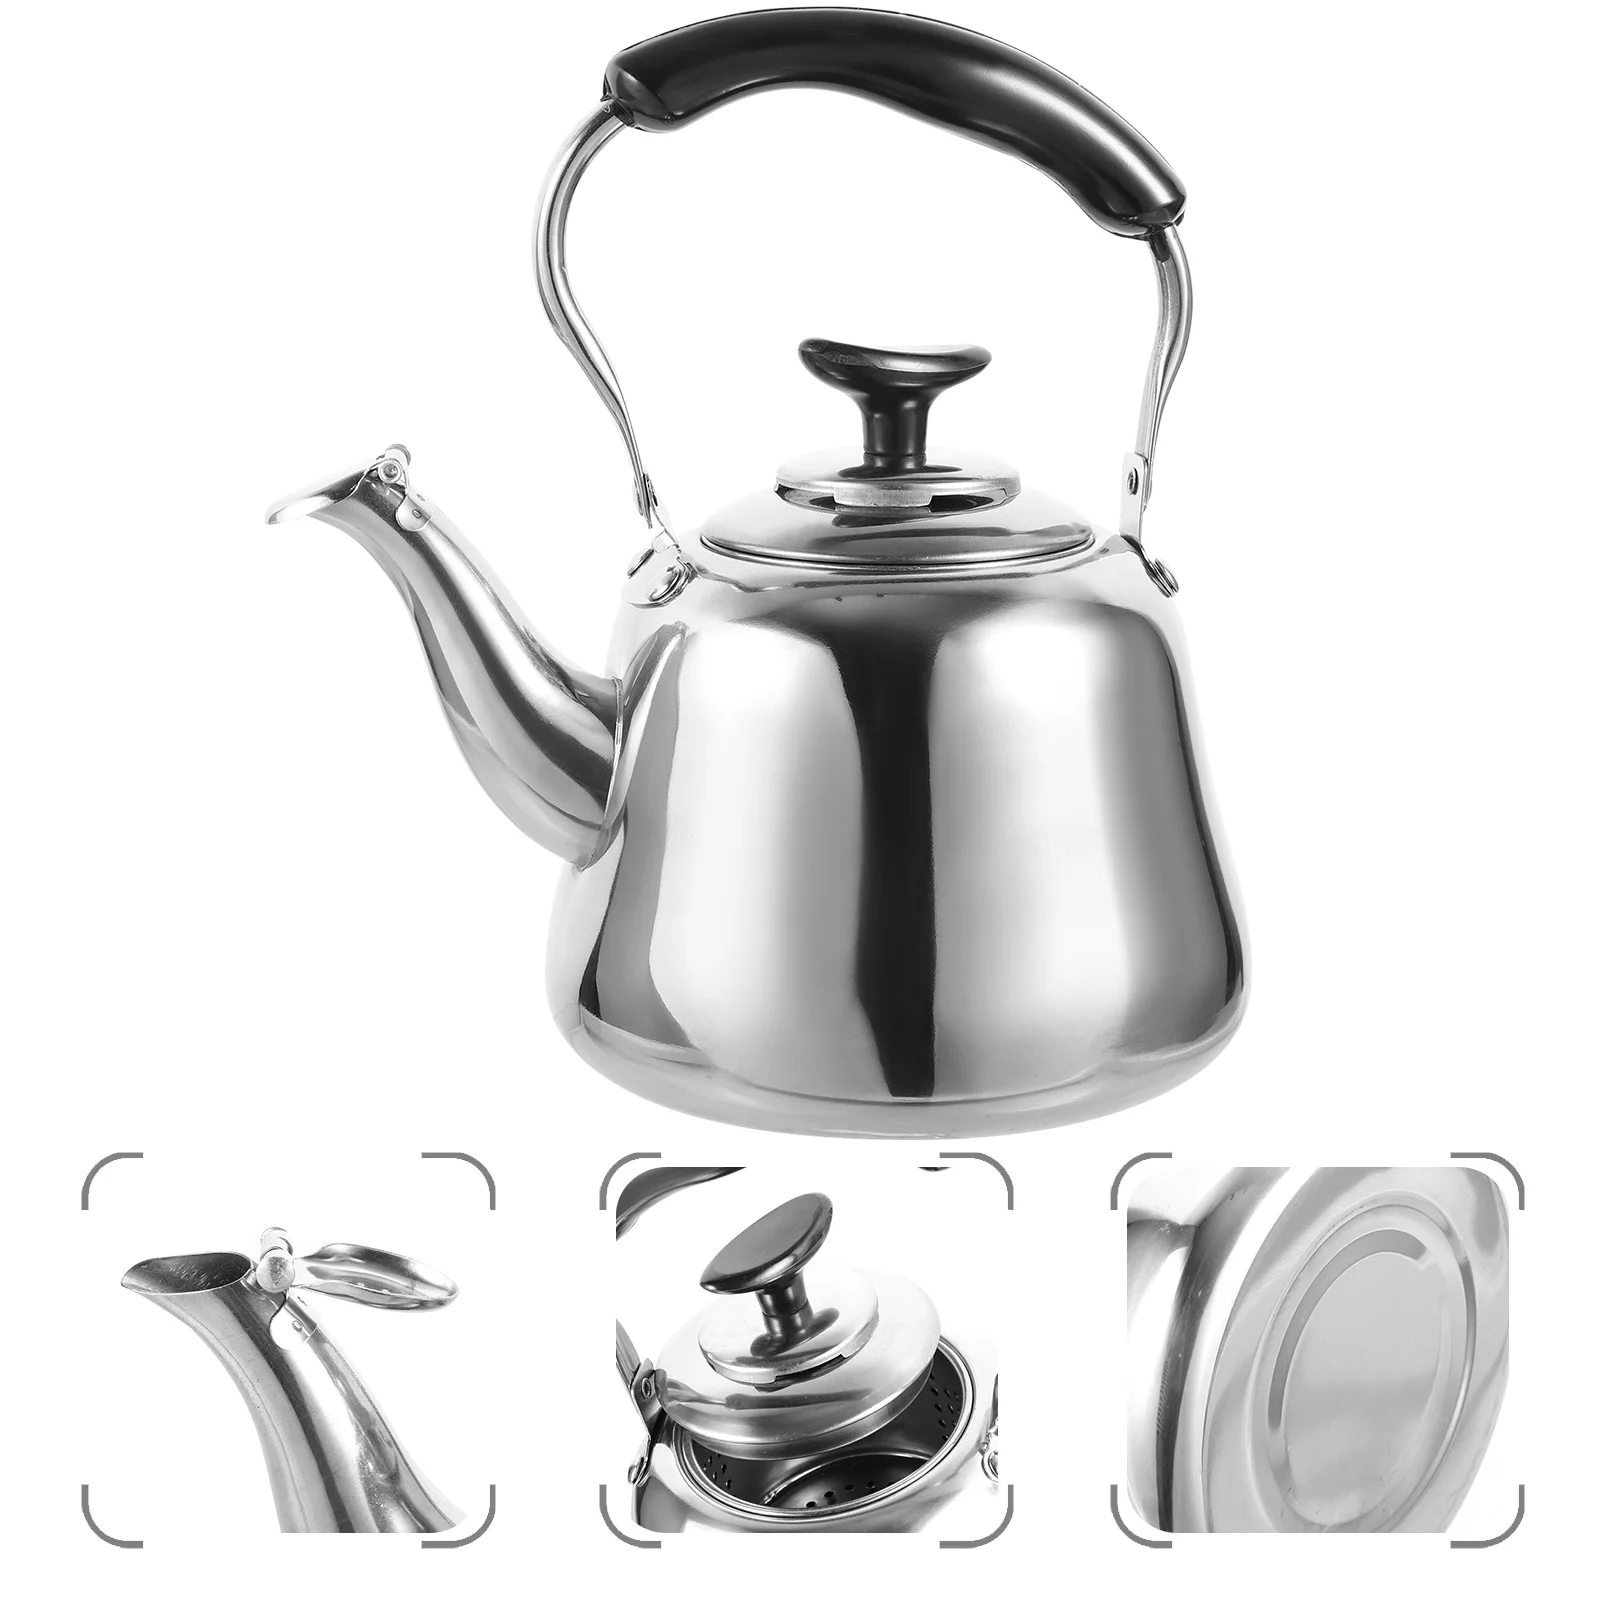 

Kettle Tea Whistling Water Teapot Steel Stainless Stovetop Stove Pot Boiling Coffee Gas Kettles Teakettle Hot Camping Boil